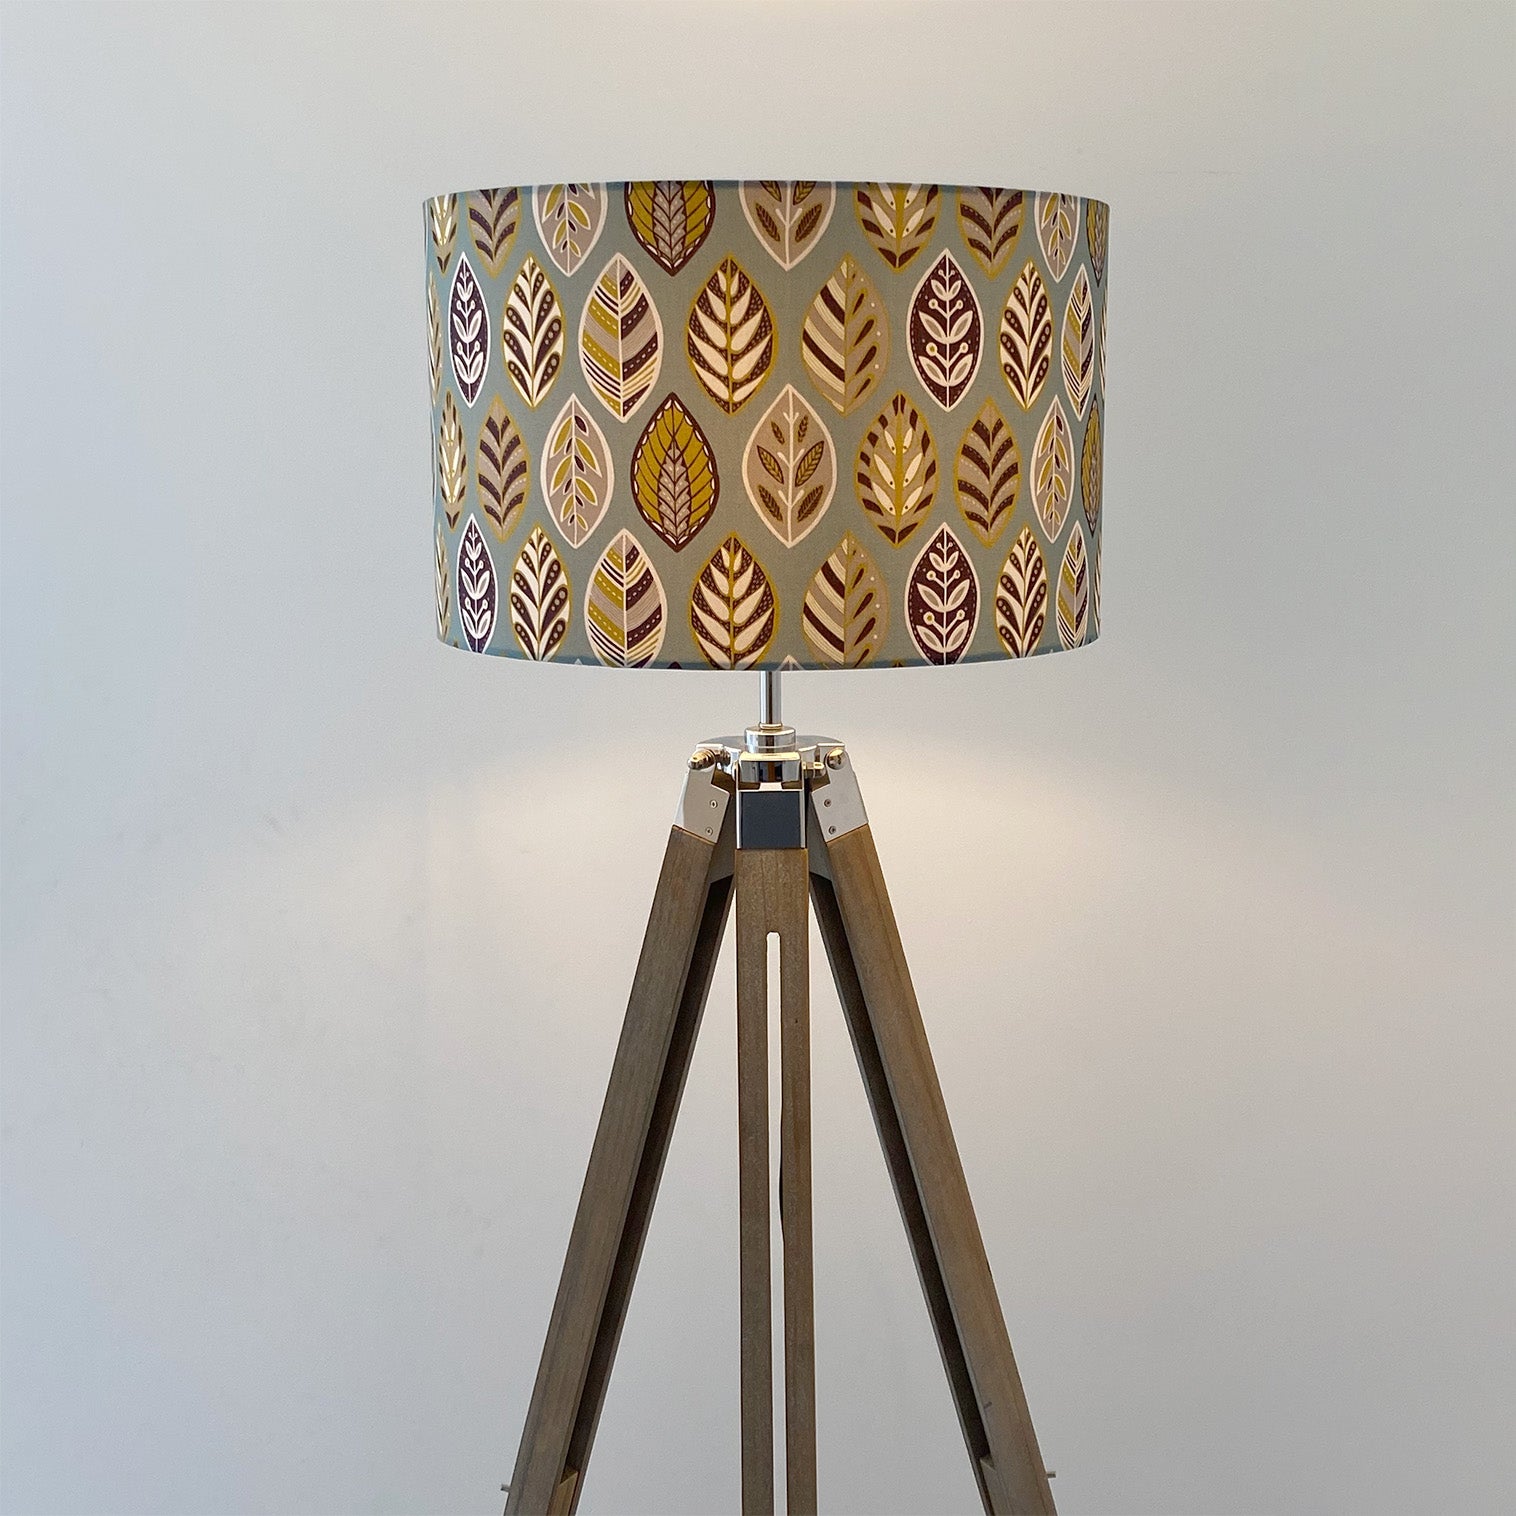 Large Blue Beech leaf Lampshade, shown here on a wooden tripod floor lamp. The pattern features a Skandi style Blue, yellow, grey and white Leaf pattern on a Blue Background.  The light is shown on in this photograph.